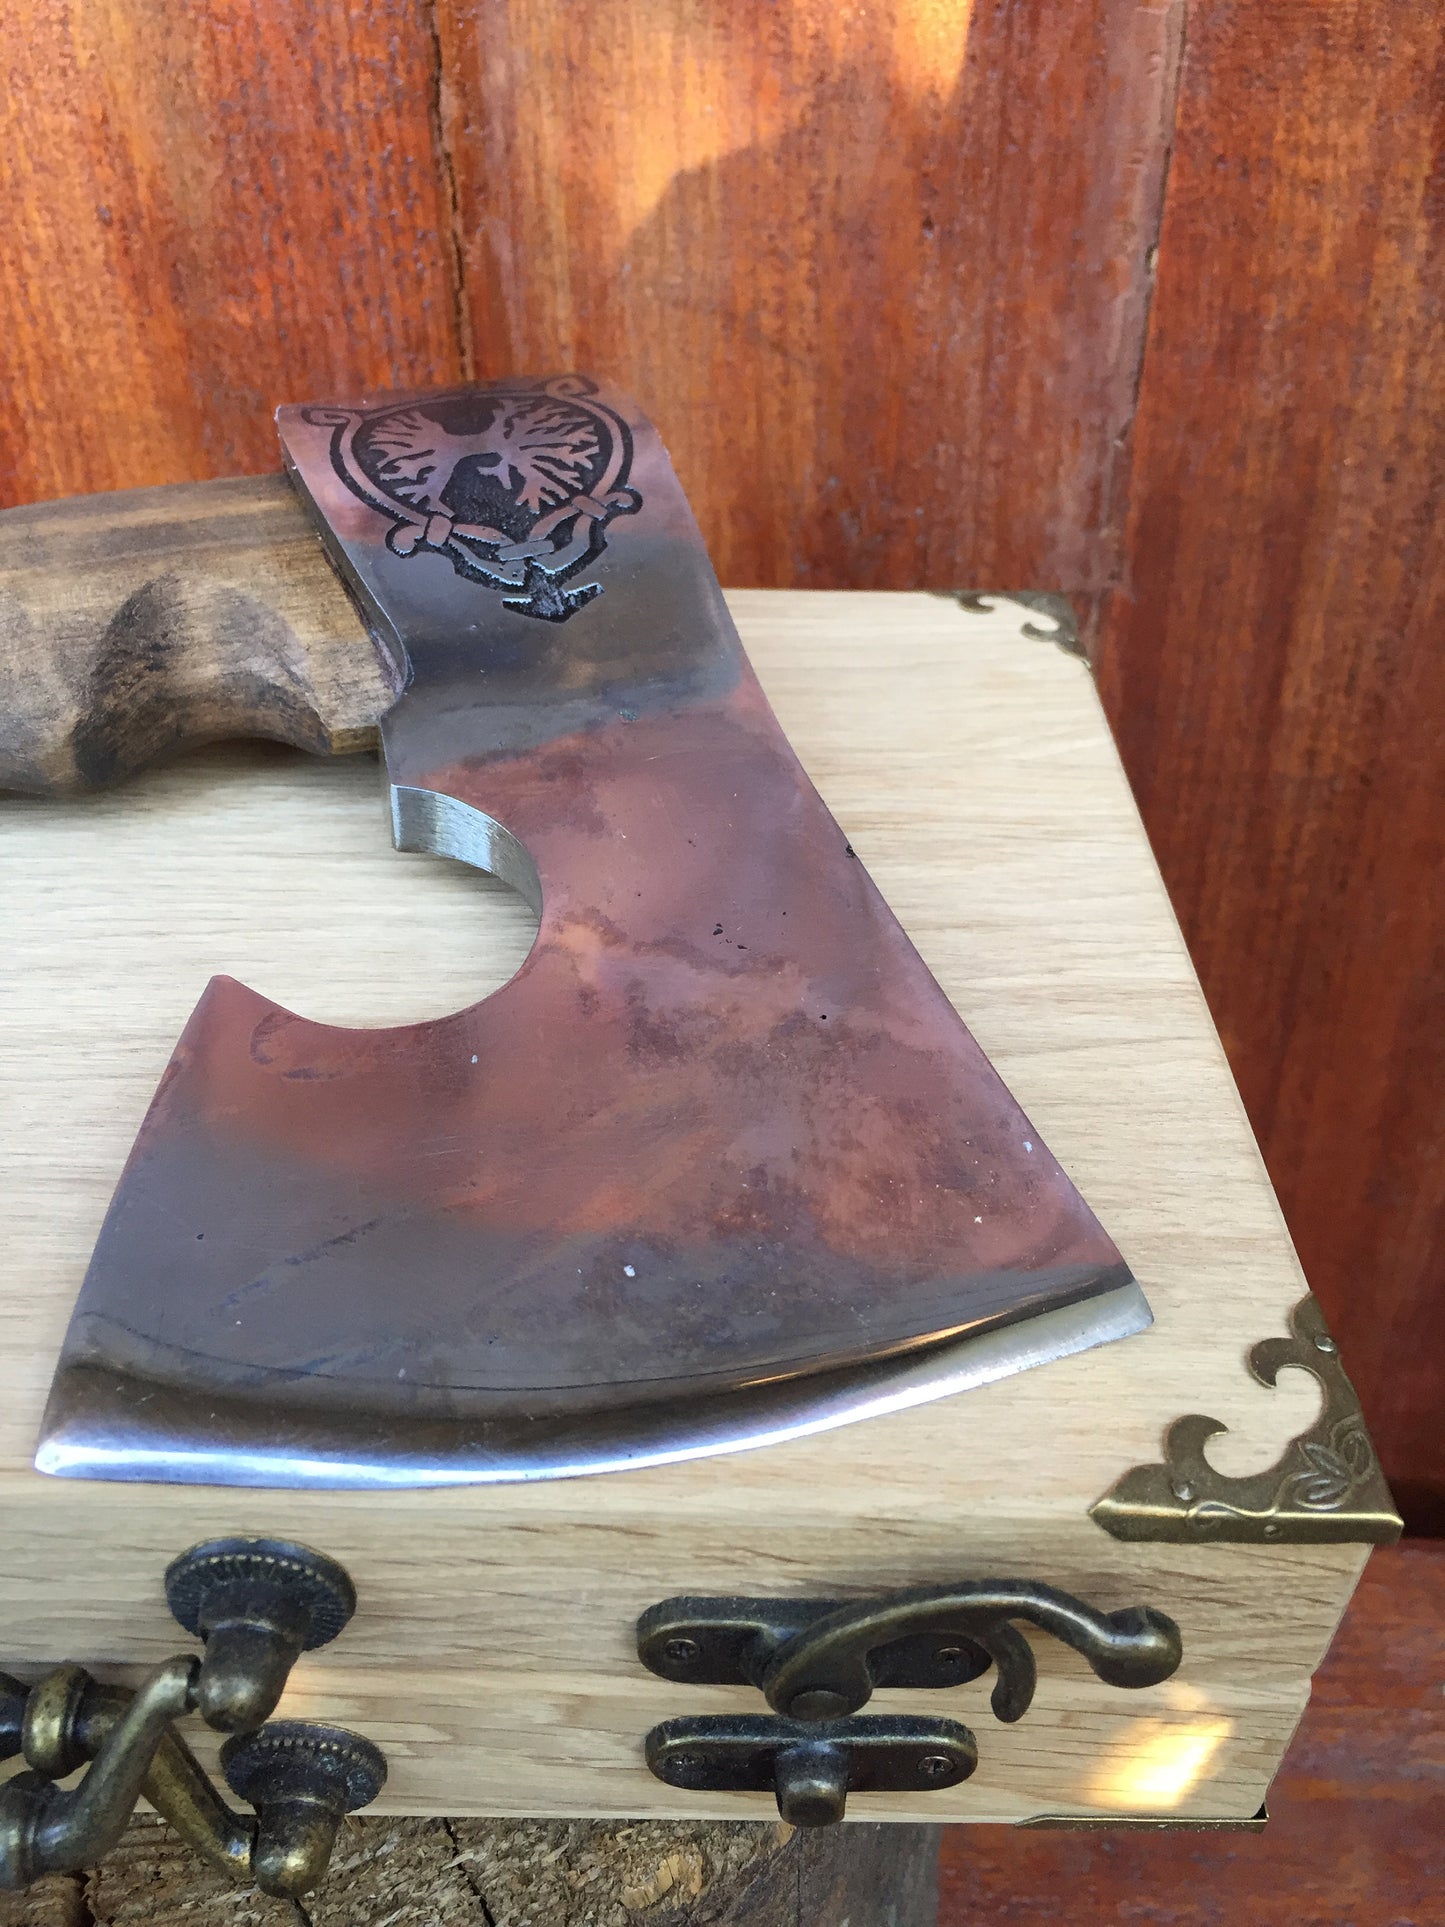 6th anniversary gift for him, iron gift for him, 11th anniversary gift for him, viking axe, tree of life, axe, mens gifts, gifts for men,axe